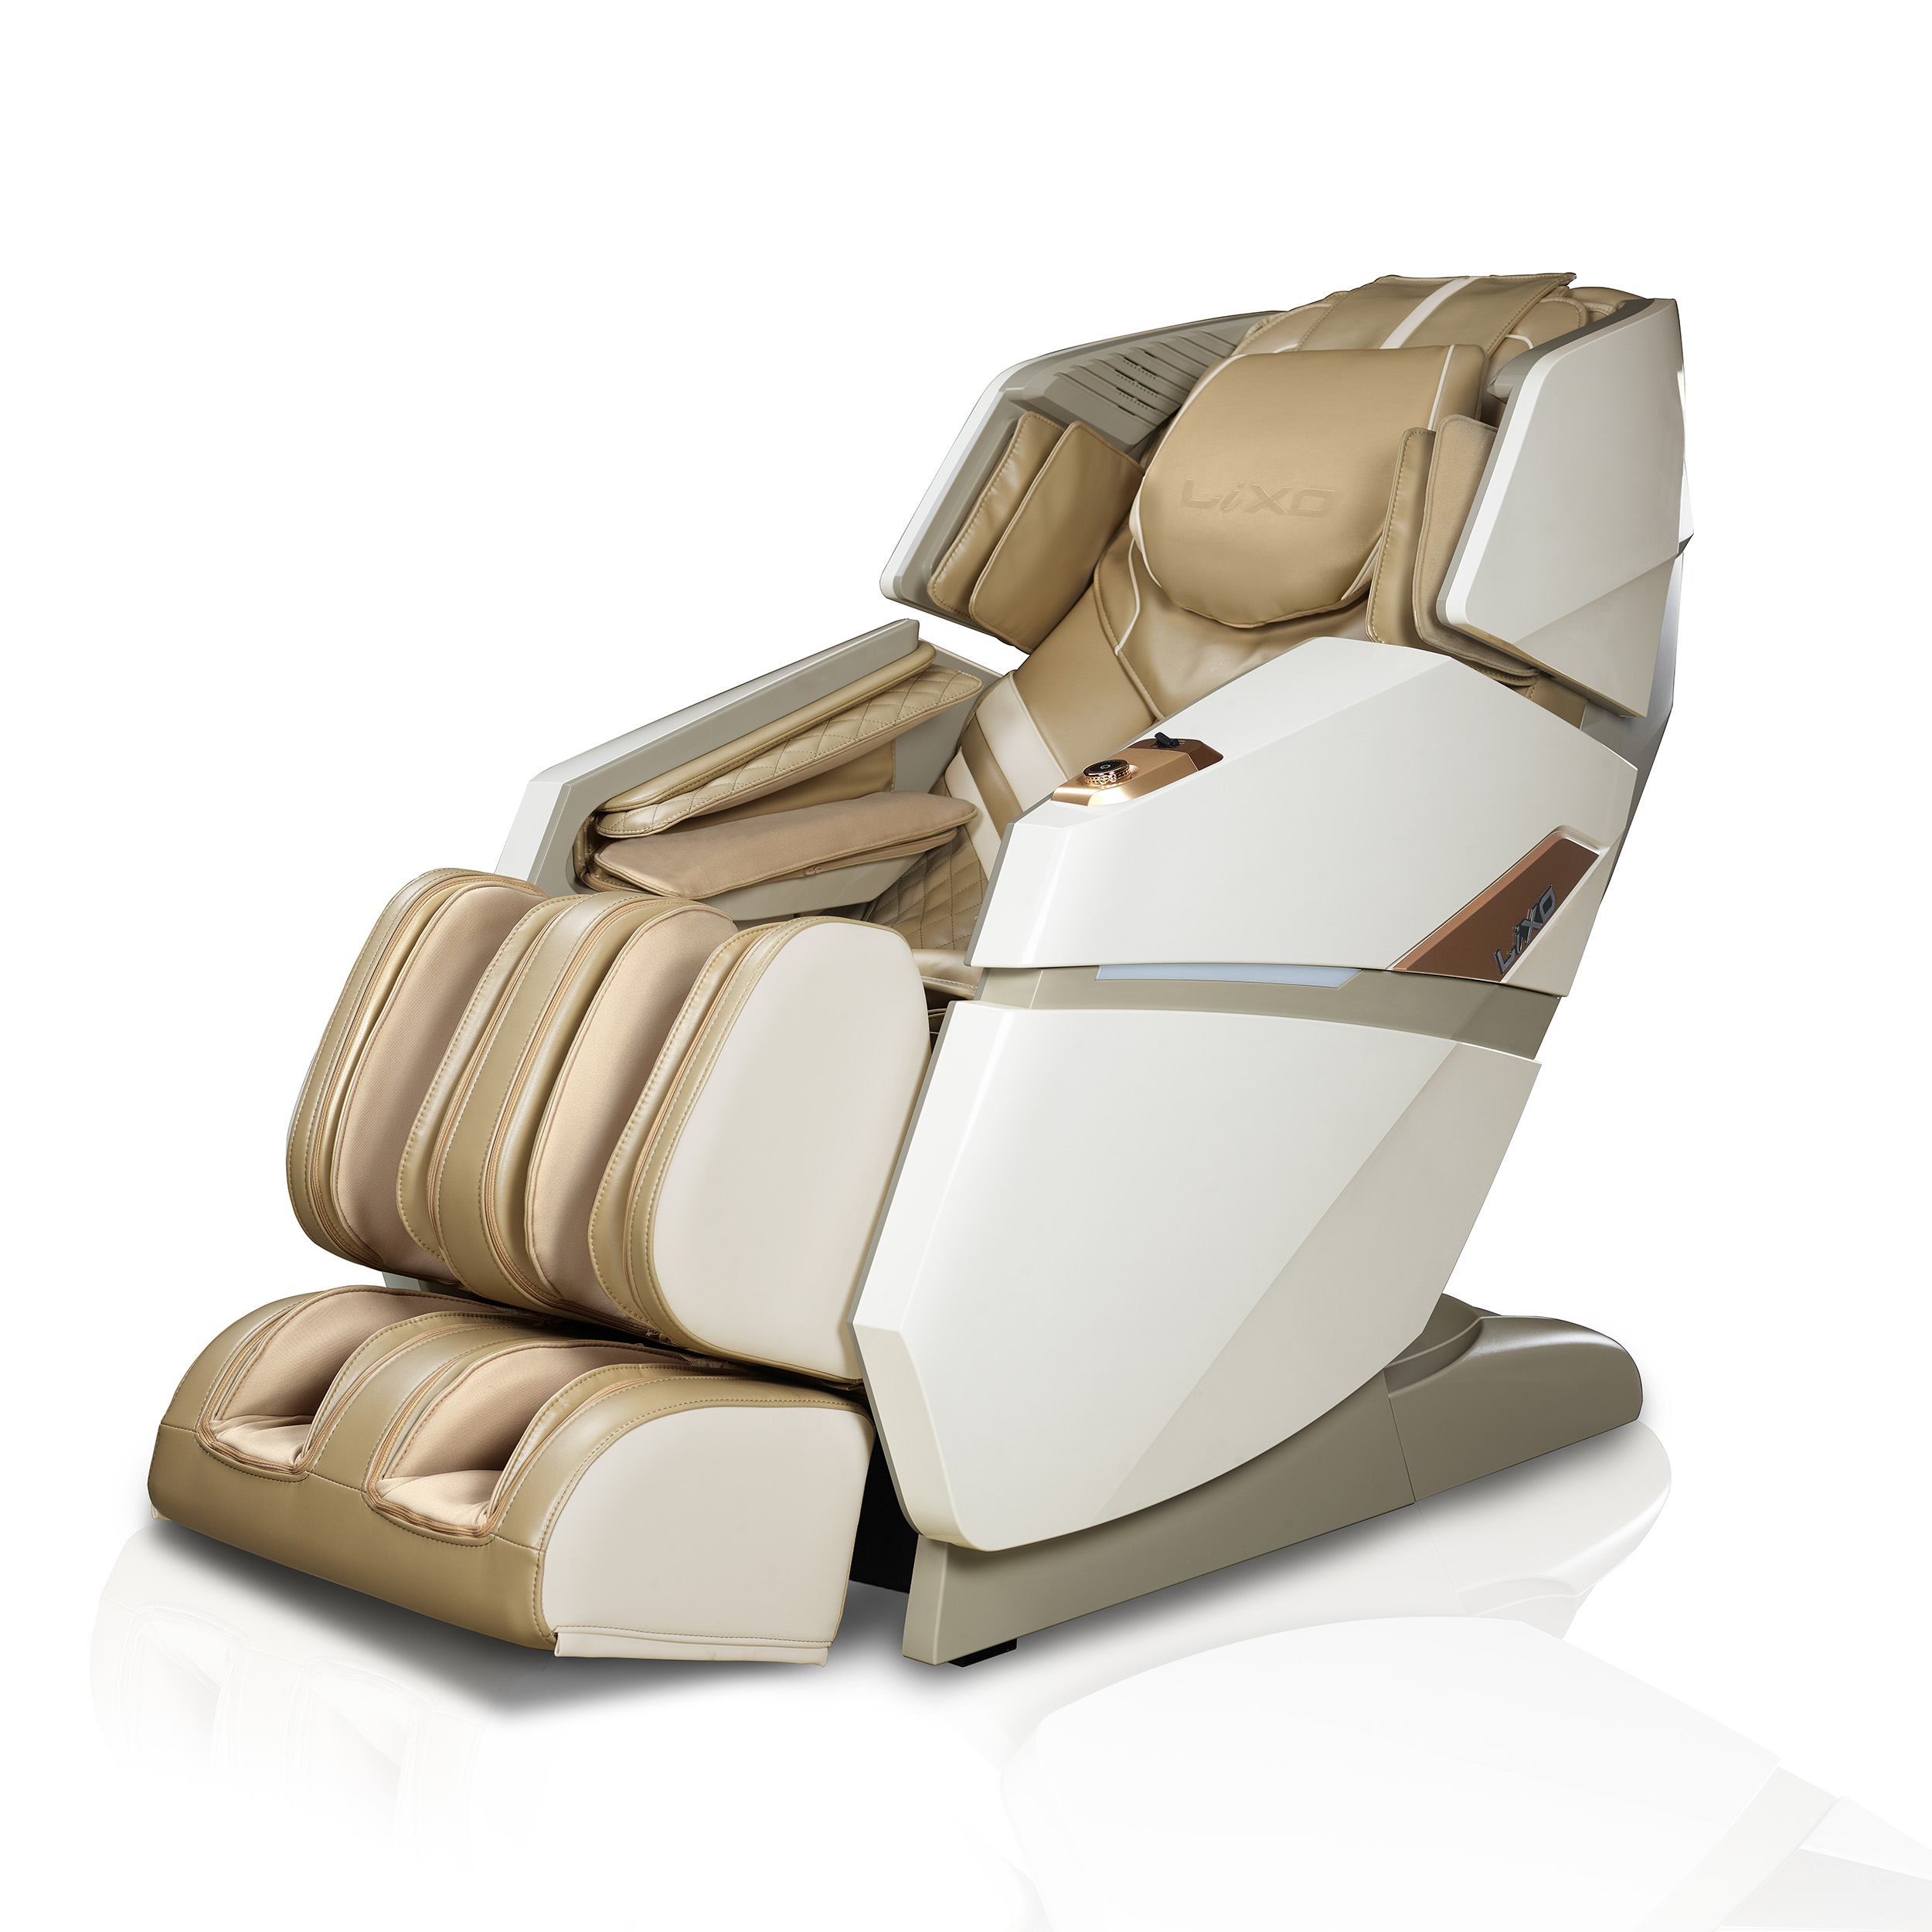 Body Massage Chair Price in India